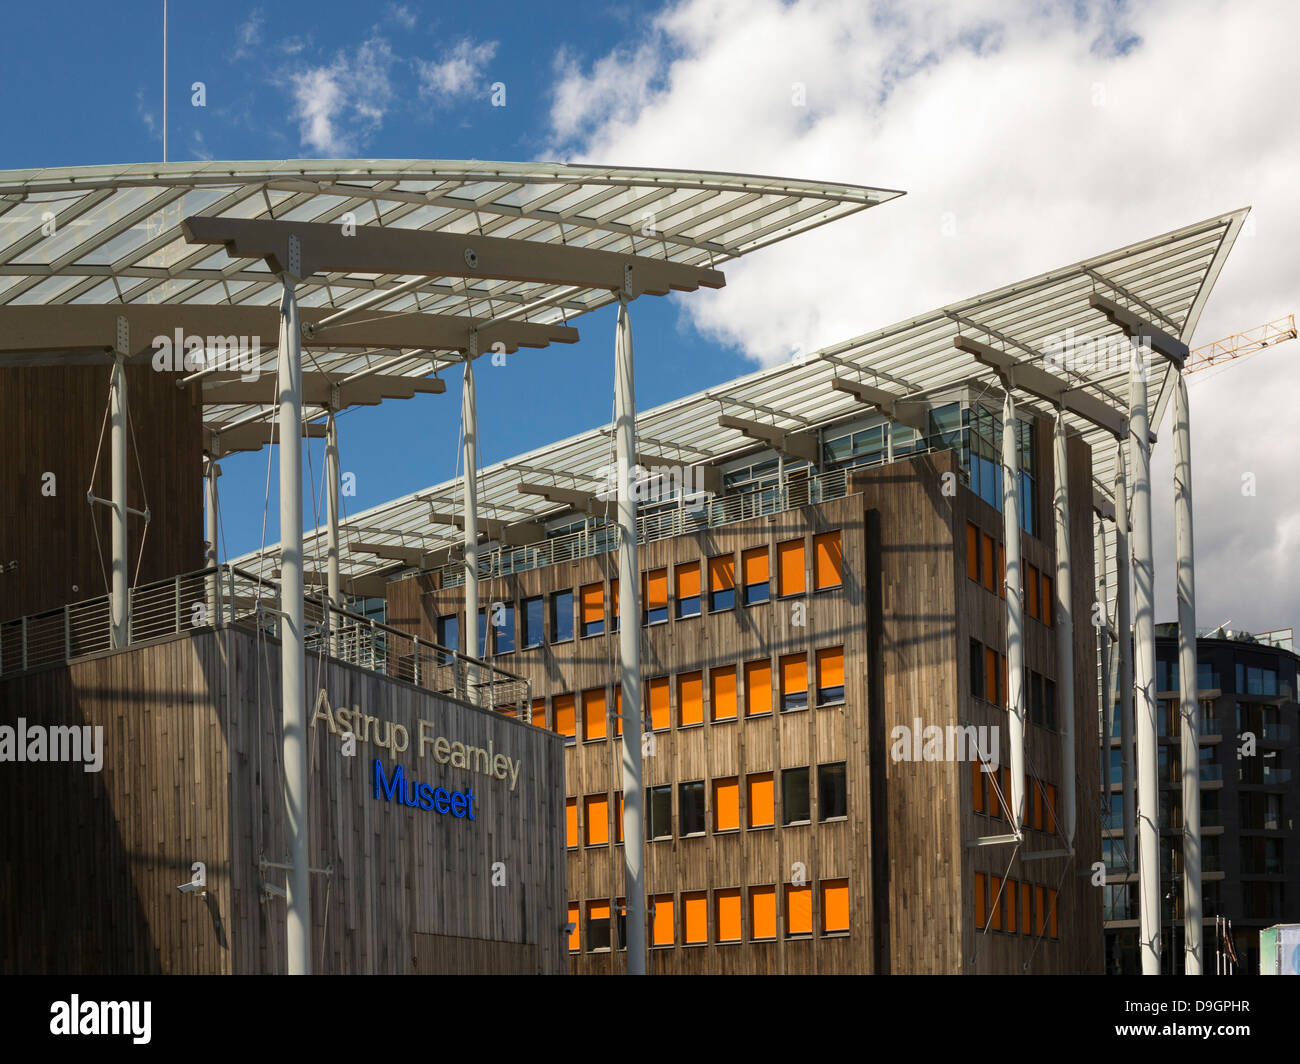 Astrup Fearnley Museet, Museum of Modern Art, Oslo, Norway, Europe - modern architecture Stock Photo